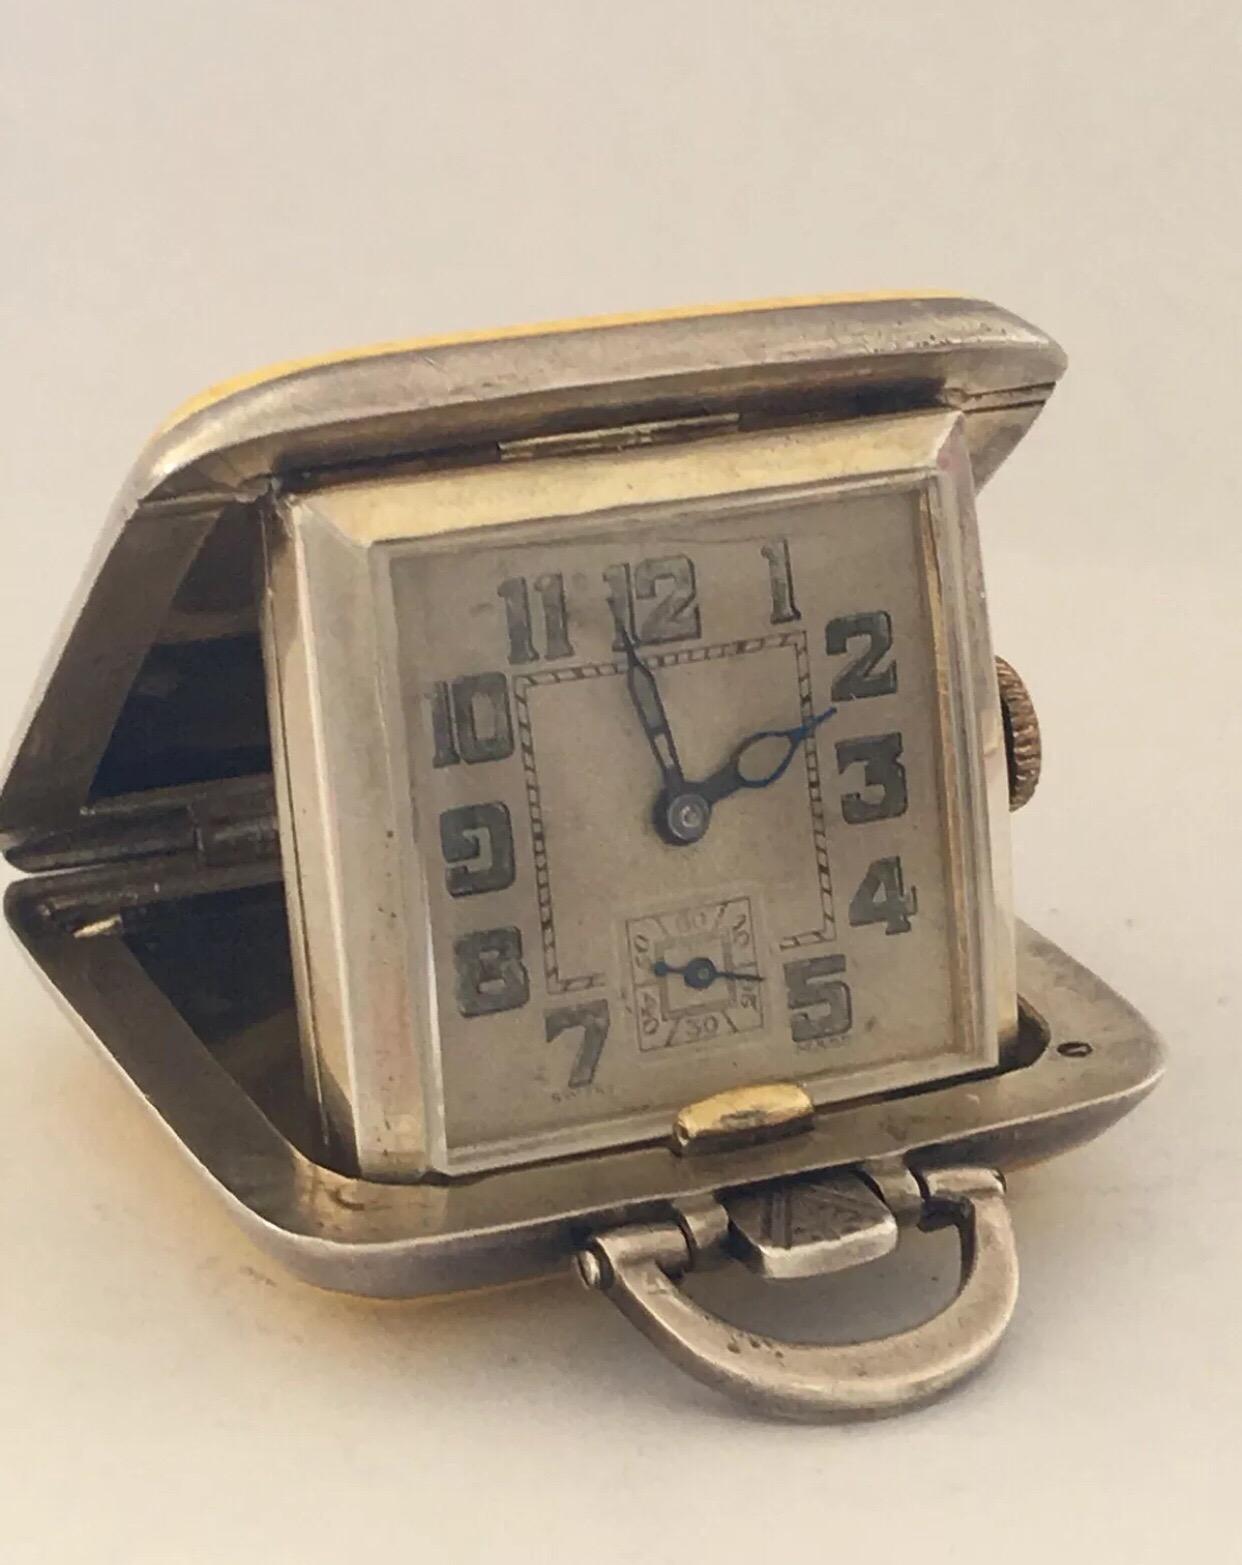 Small Silver yellow Enamel Travel Clock.


This clock is working and ticking well. Visible chipped on the side of the enamel case as shown on the photos.